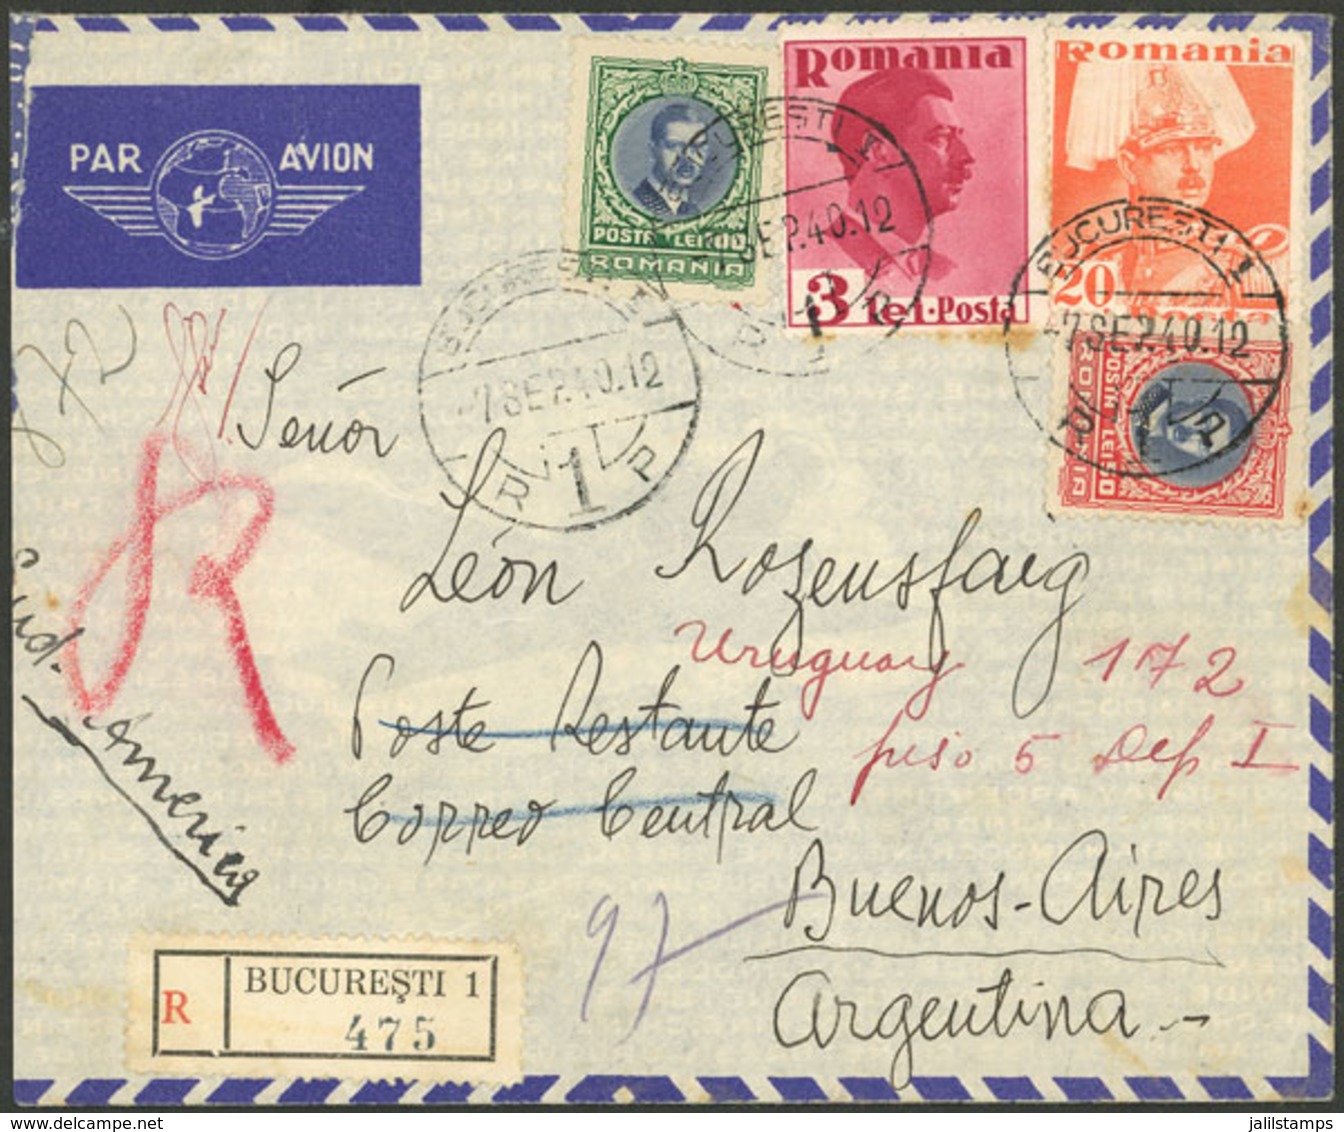 ROMANIA: 7/SE/1940 Bucharest - Argentina, Registered Airmail Cover With Nice 4-color Postage, Arrival Backstamp, Unusual - Briefe U. Dokumente